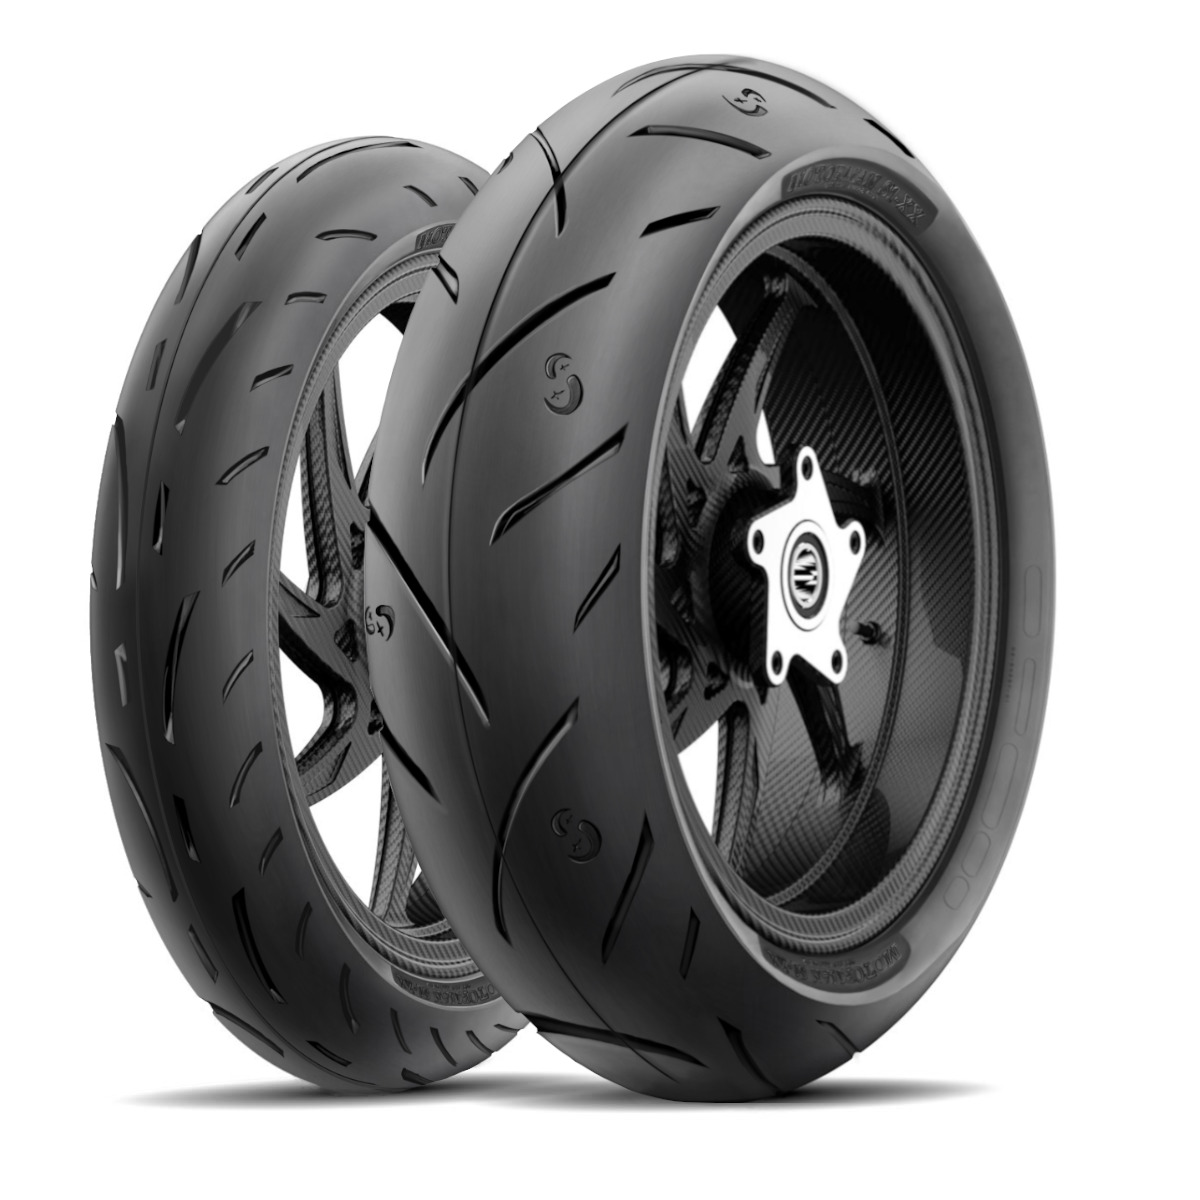 190/55-17 + 120/70-17 MMT® Motorcycle Tire SET 190/55ZR17 + 120/70-17 (2 TIRES)